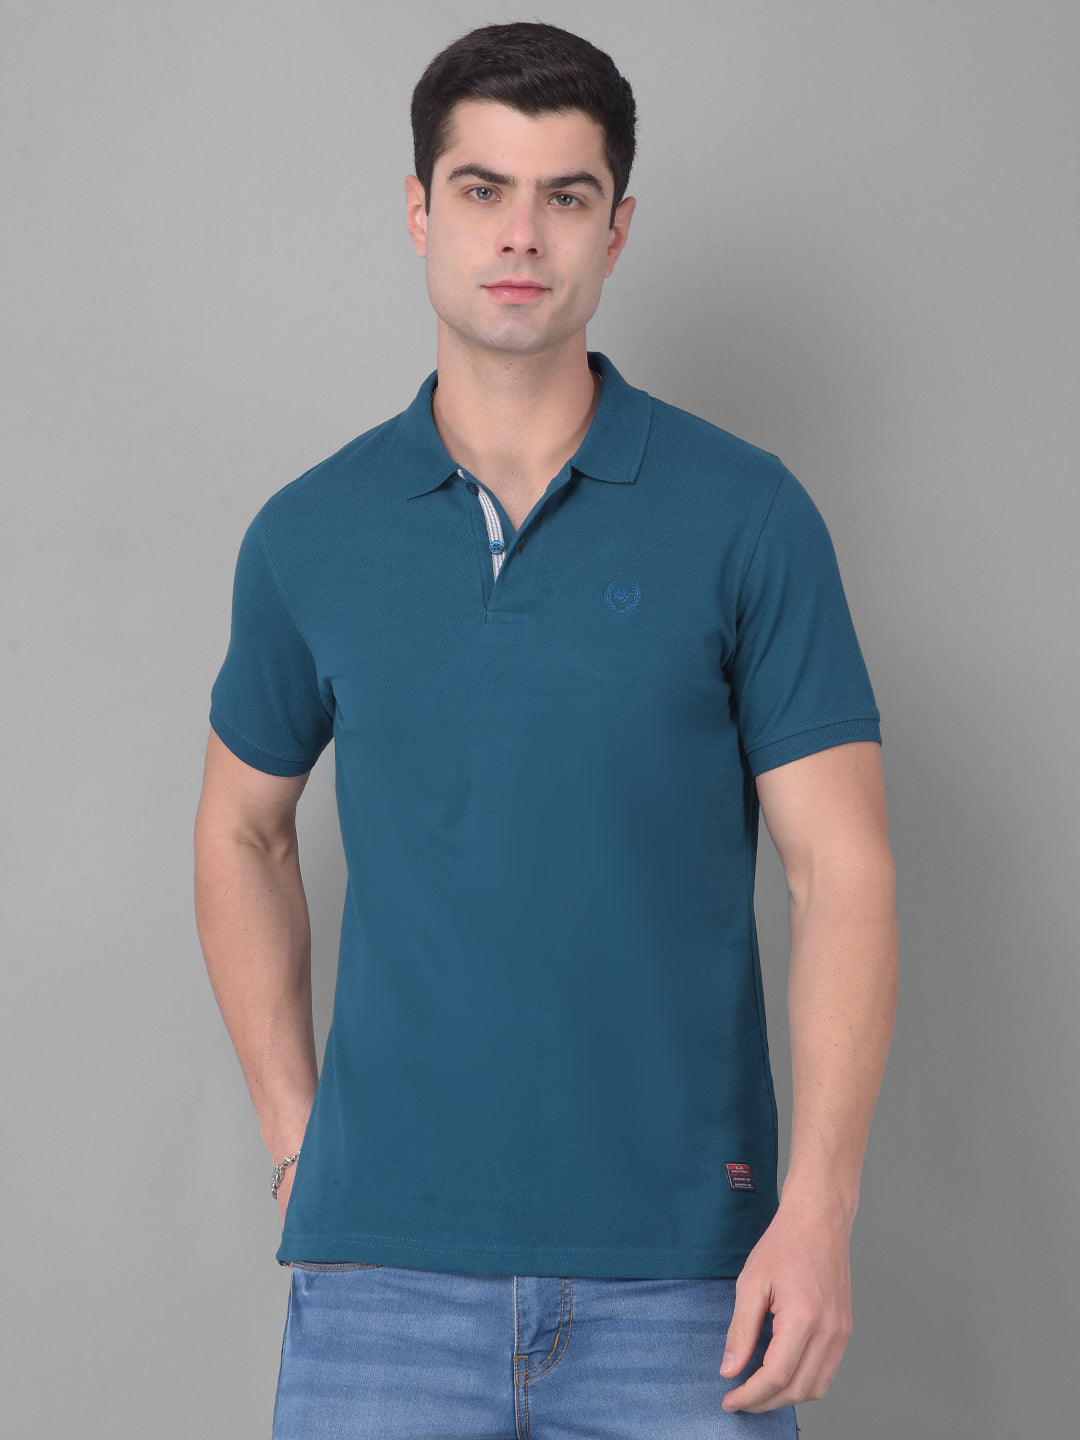 cobb solid crystal teal polo neck t-shirt